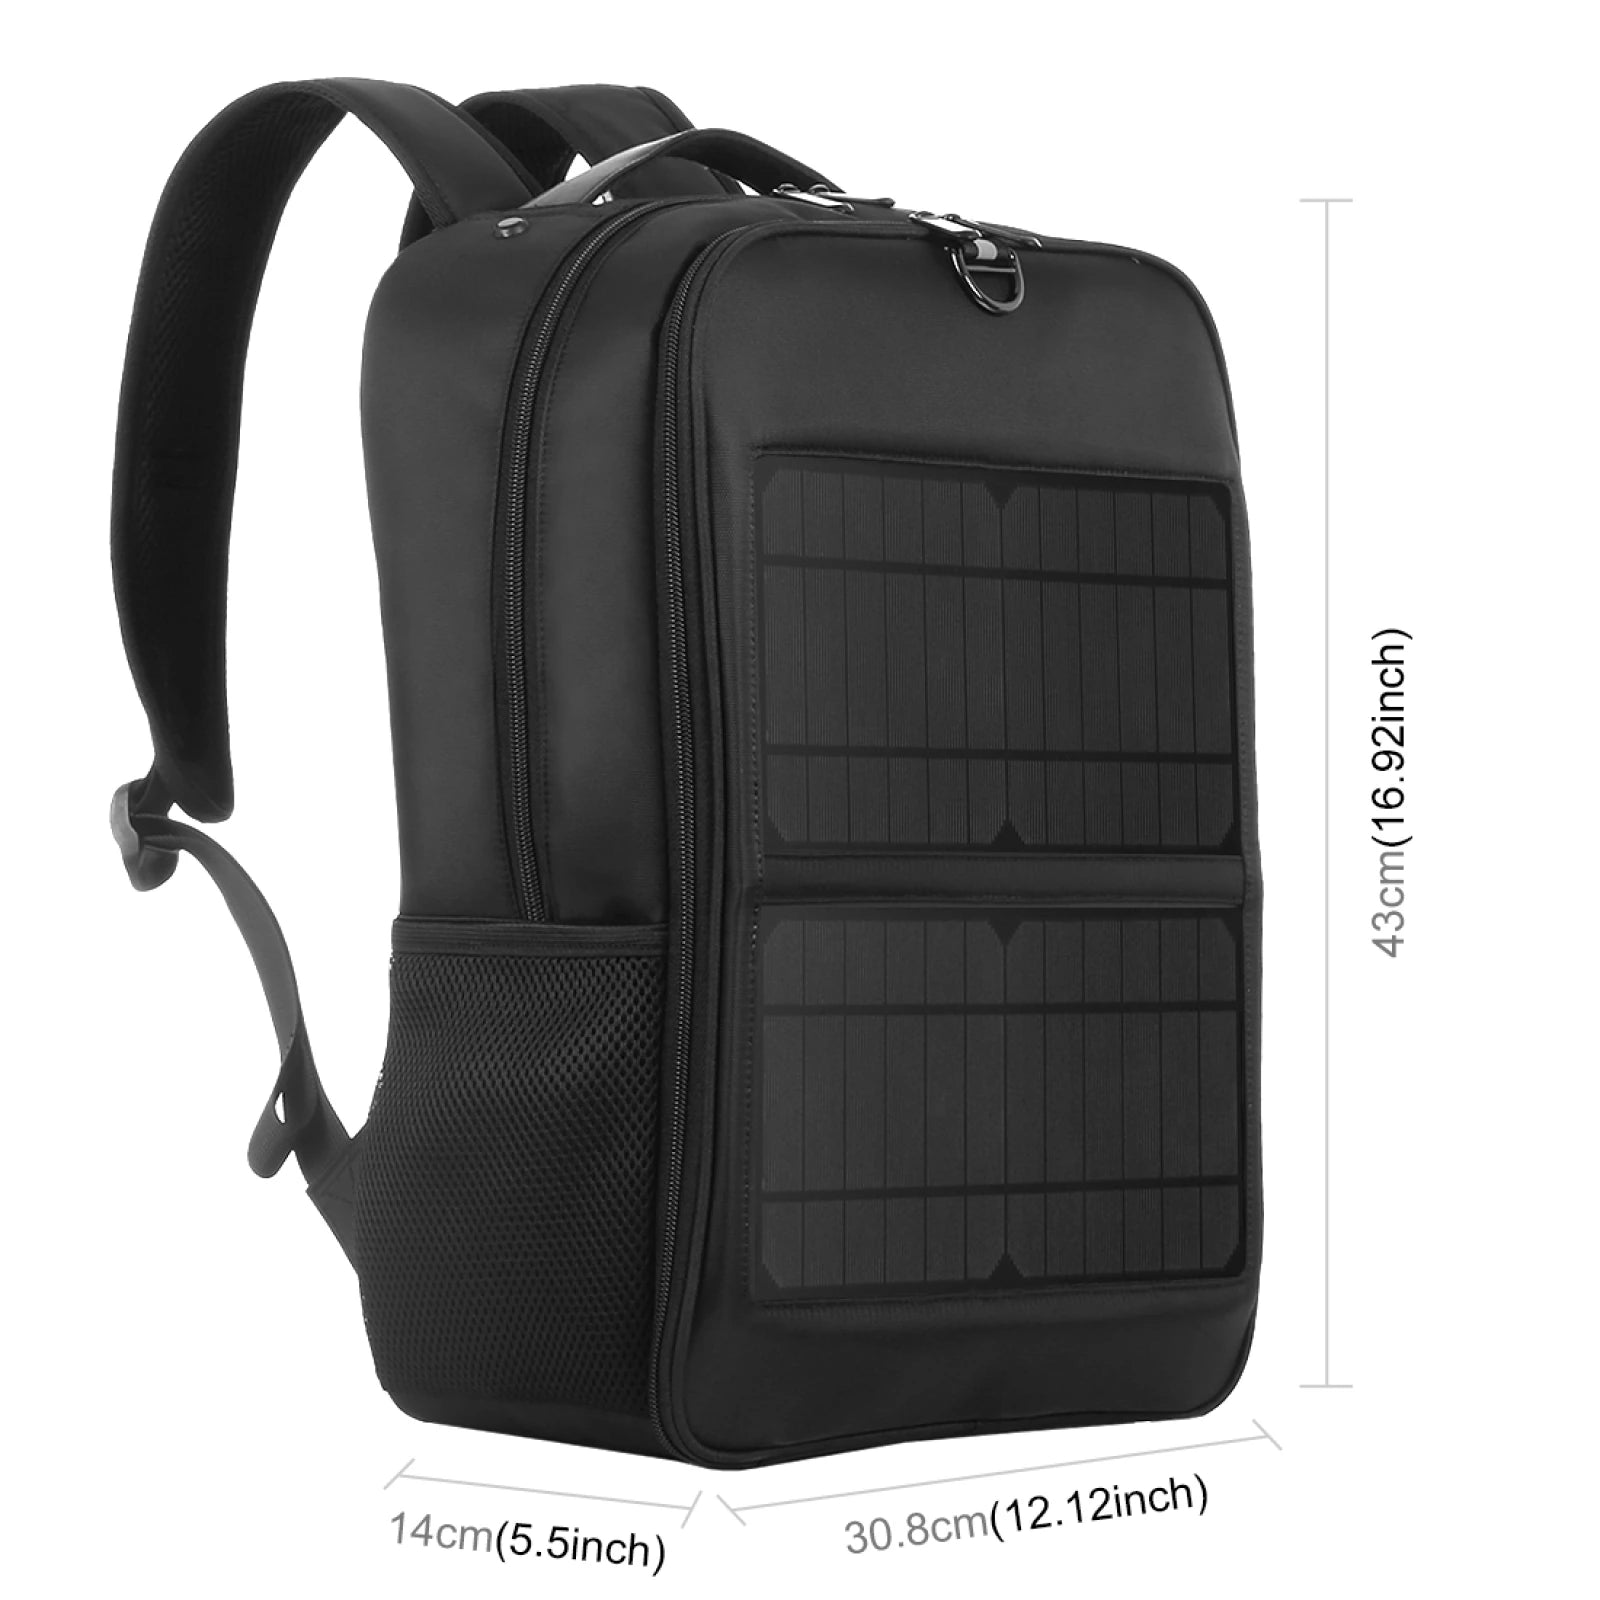 Solar Backpack 14W Solar Panel Powered Backpack Laptop Bag Water-Resistant Large Capacity with External USB Charging Port